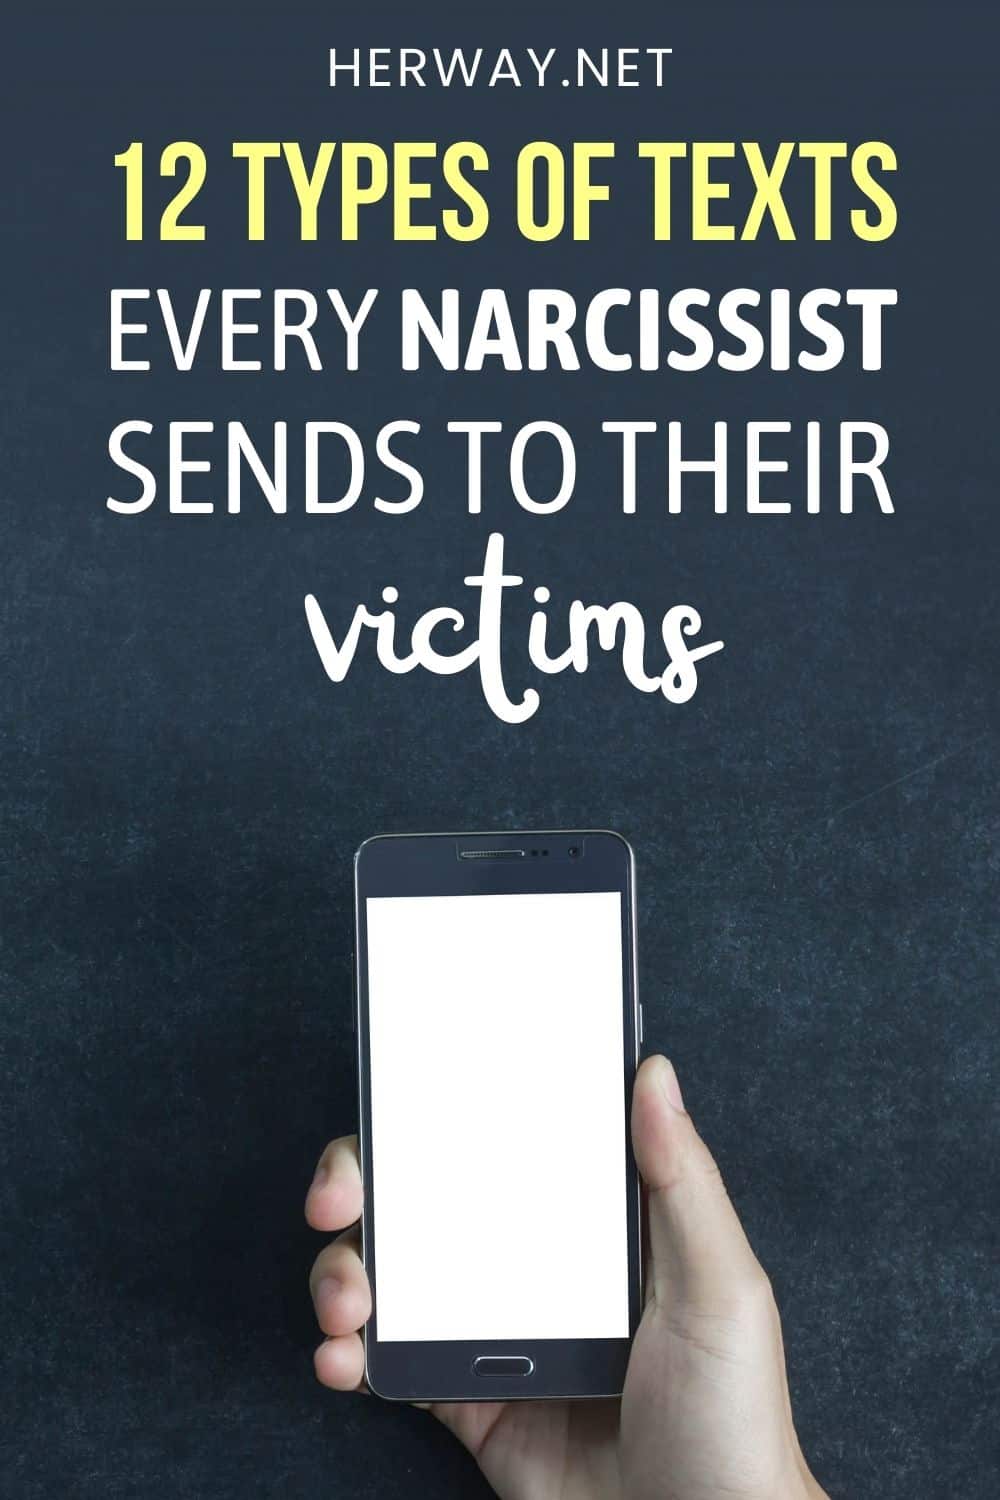 12 Common Examples Of Narcissist Text Messages (+ How To Respond) Pinterest